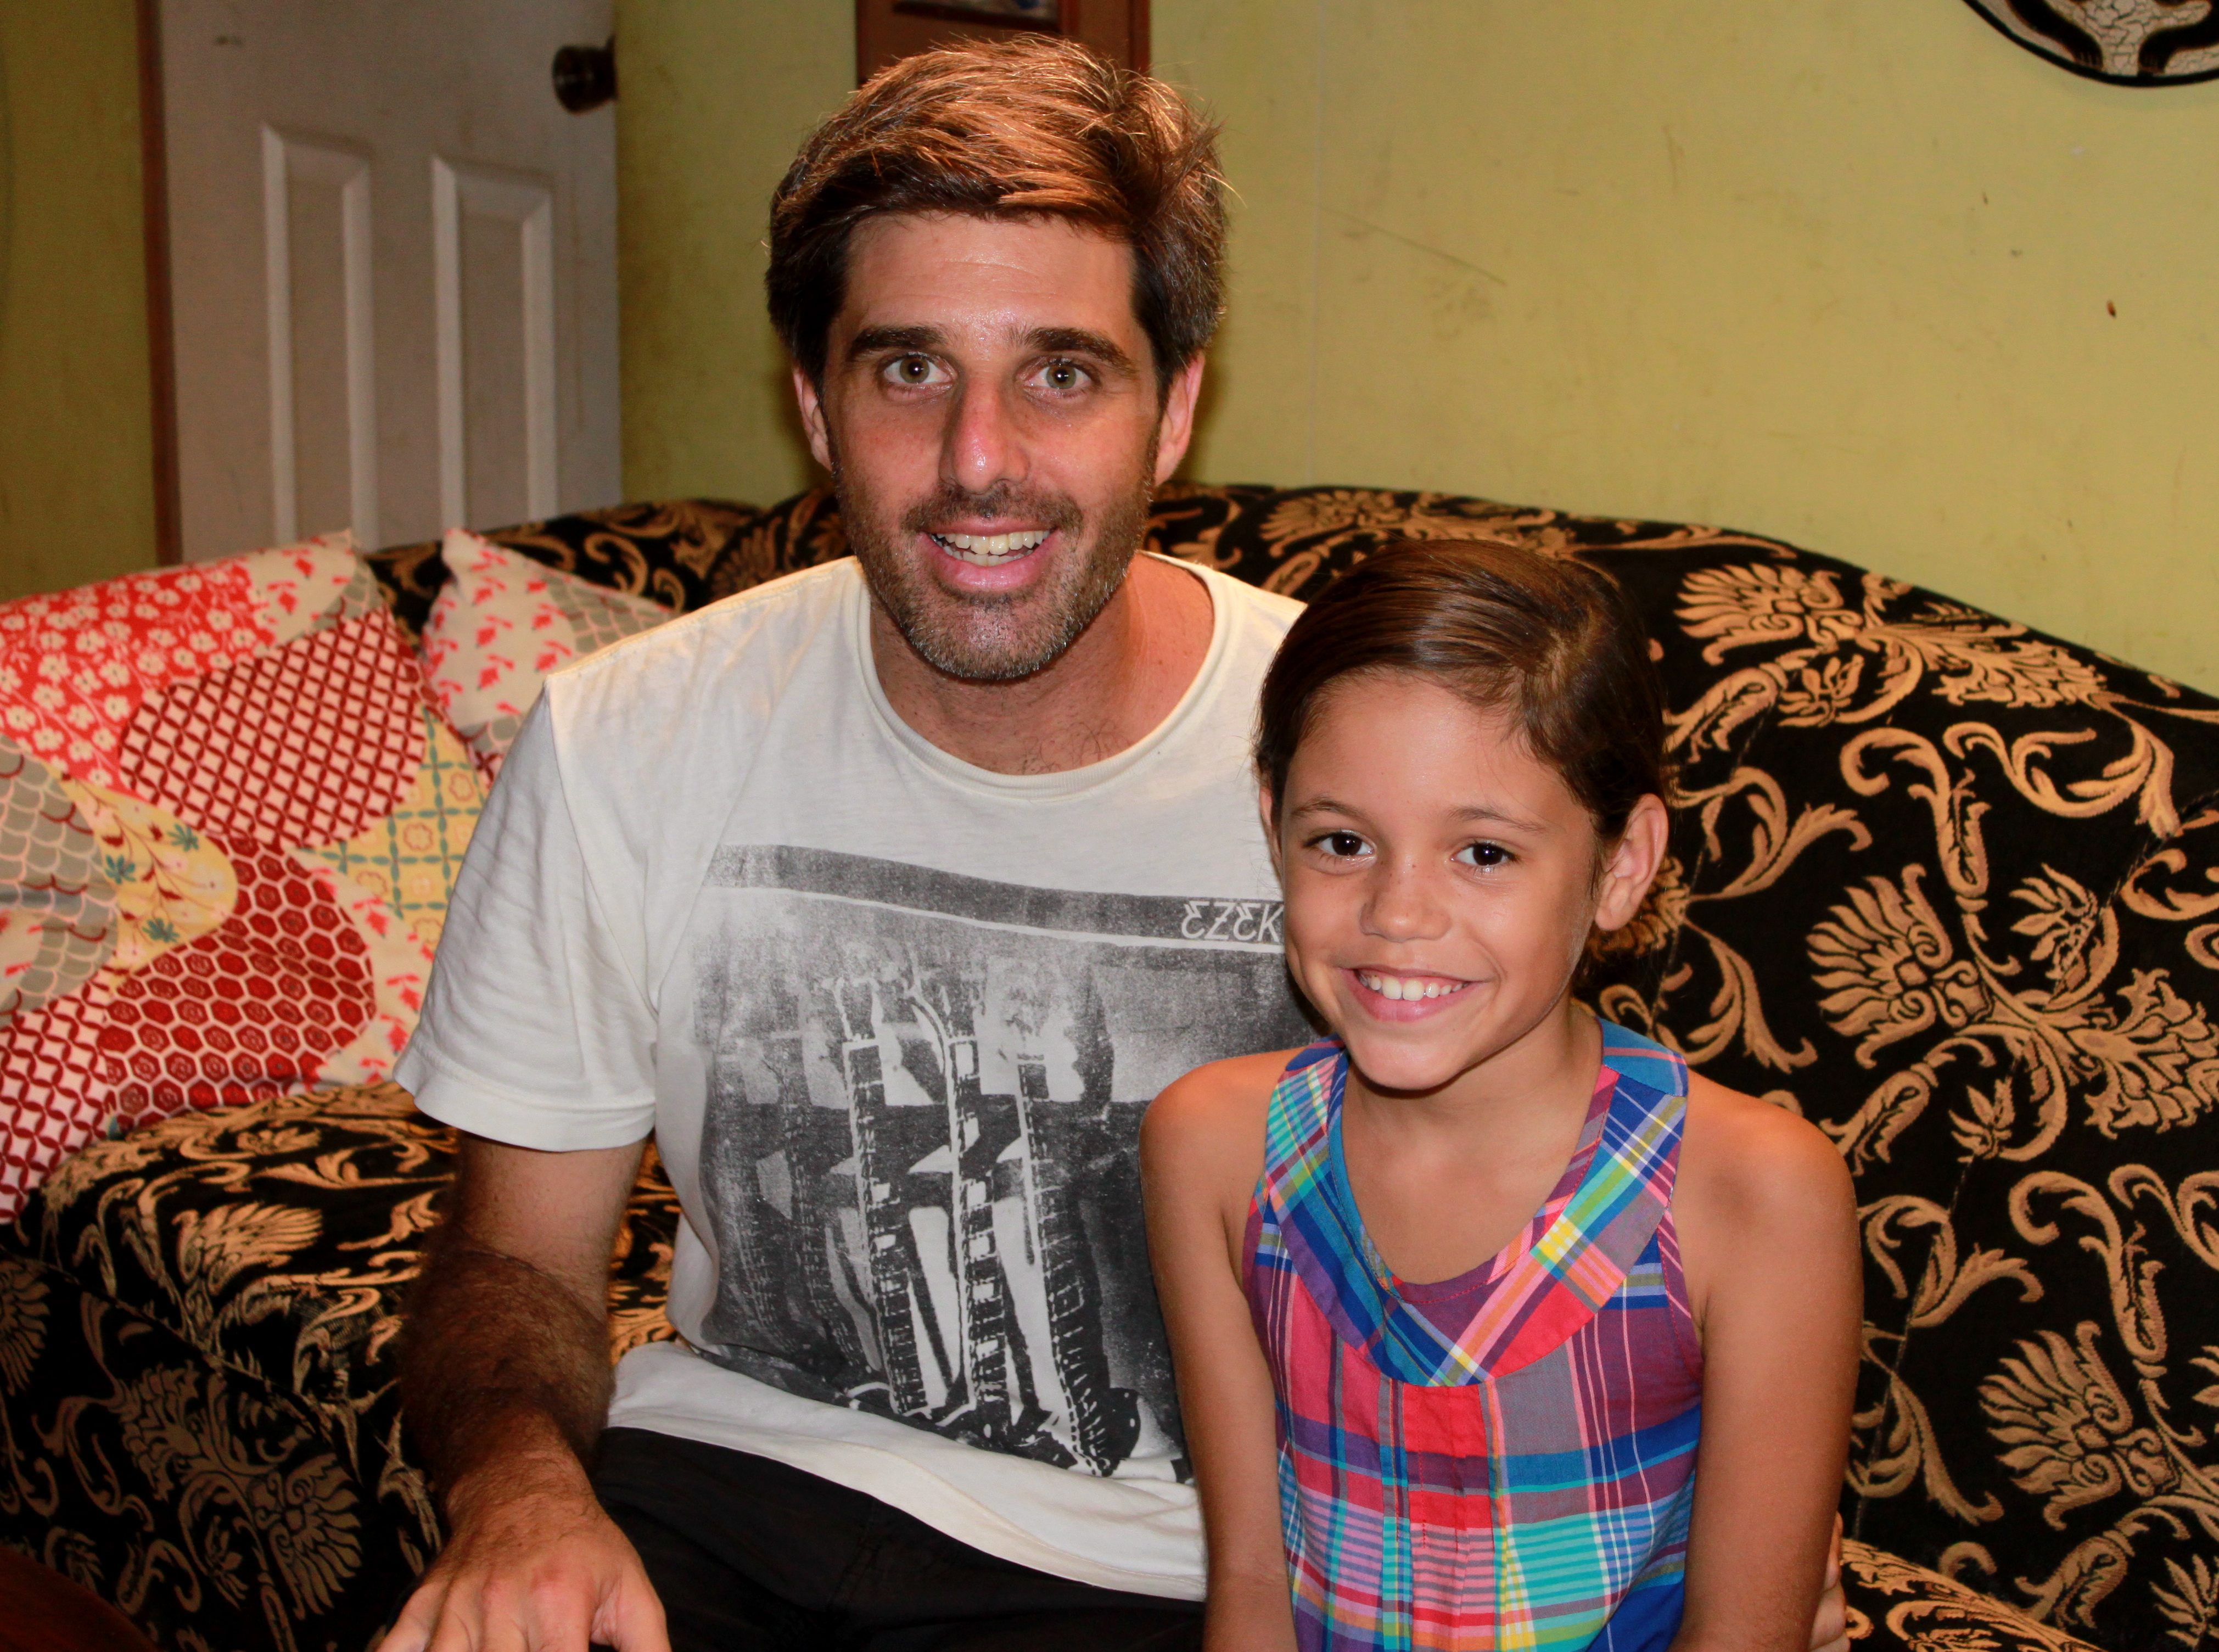 Jenna with director Juan Feldman while filming The Librarian in Costa Rica